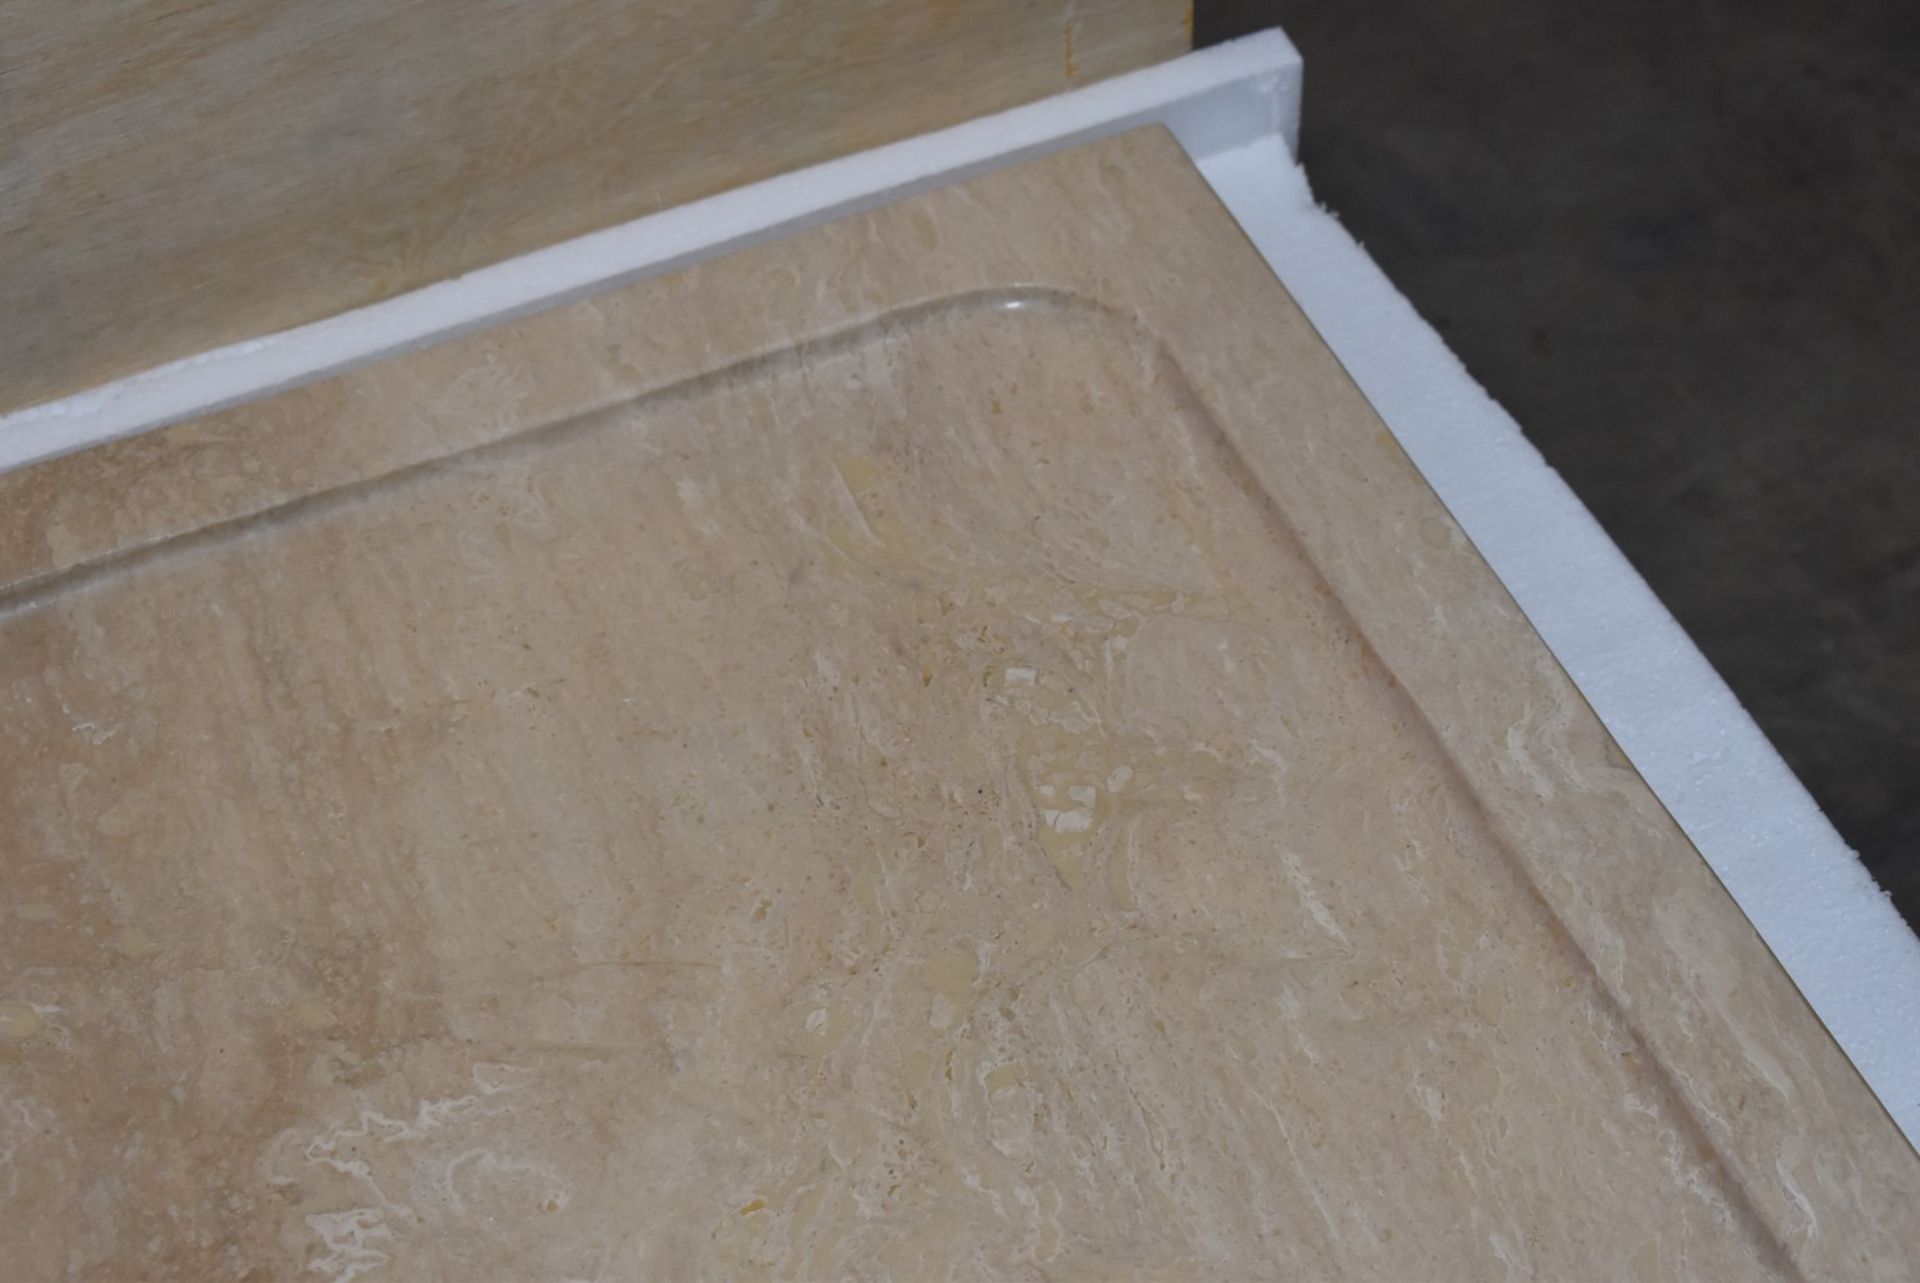 1 x Stonearth Luxury Solid Travertine Stone 900mm Shower Tray - Hand Made From Travertine Stone - Image 9 of 12